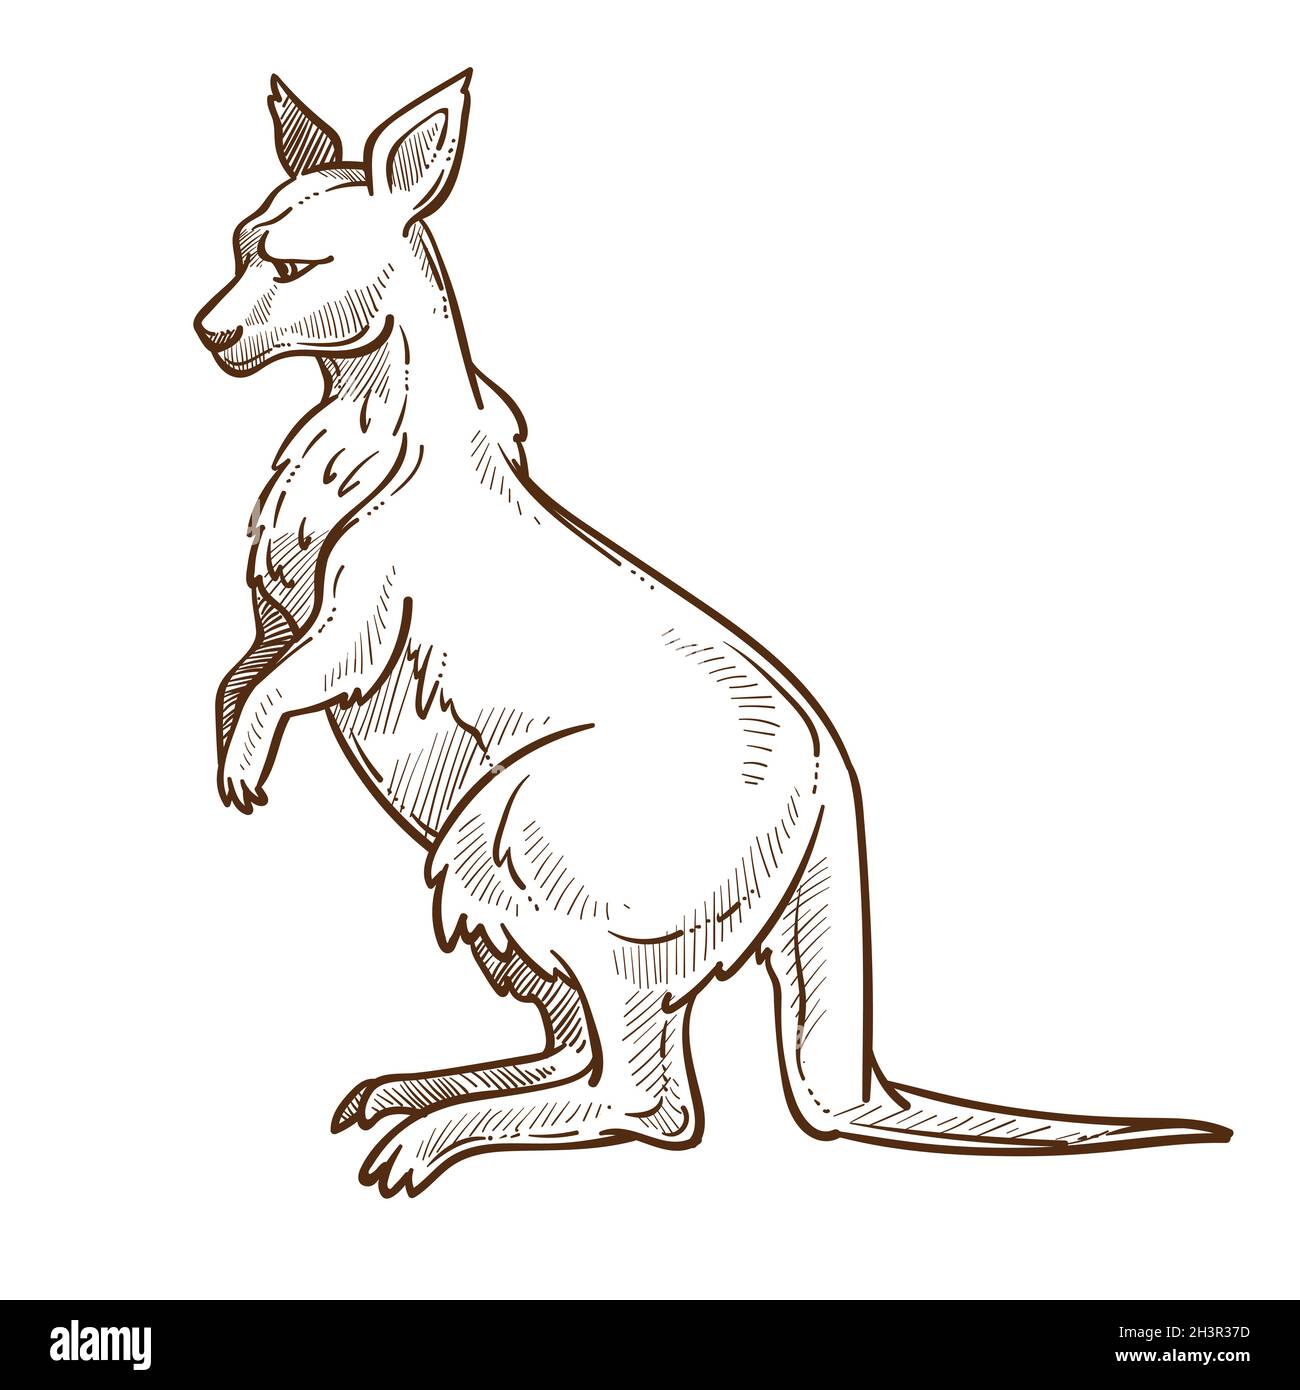 Kangaroo or wallaby isolated sketch, Australian animal with pouch Stock Vector